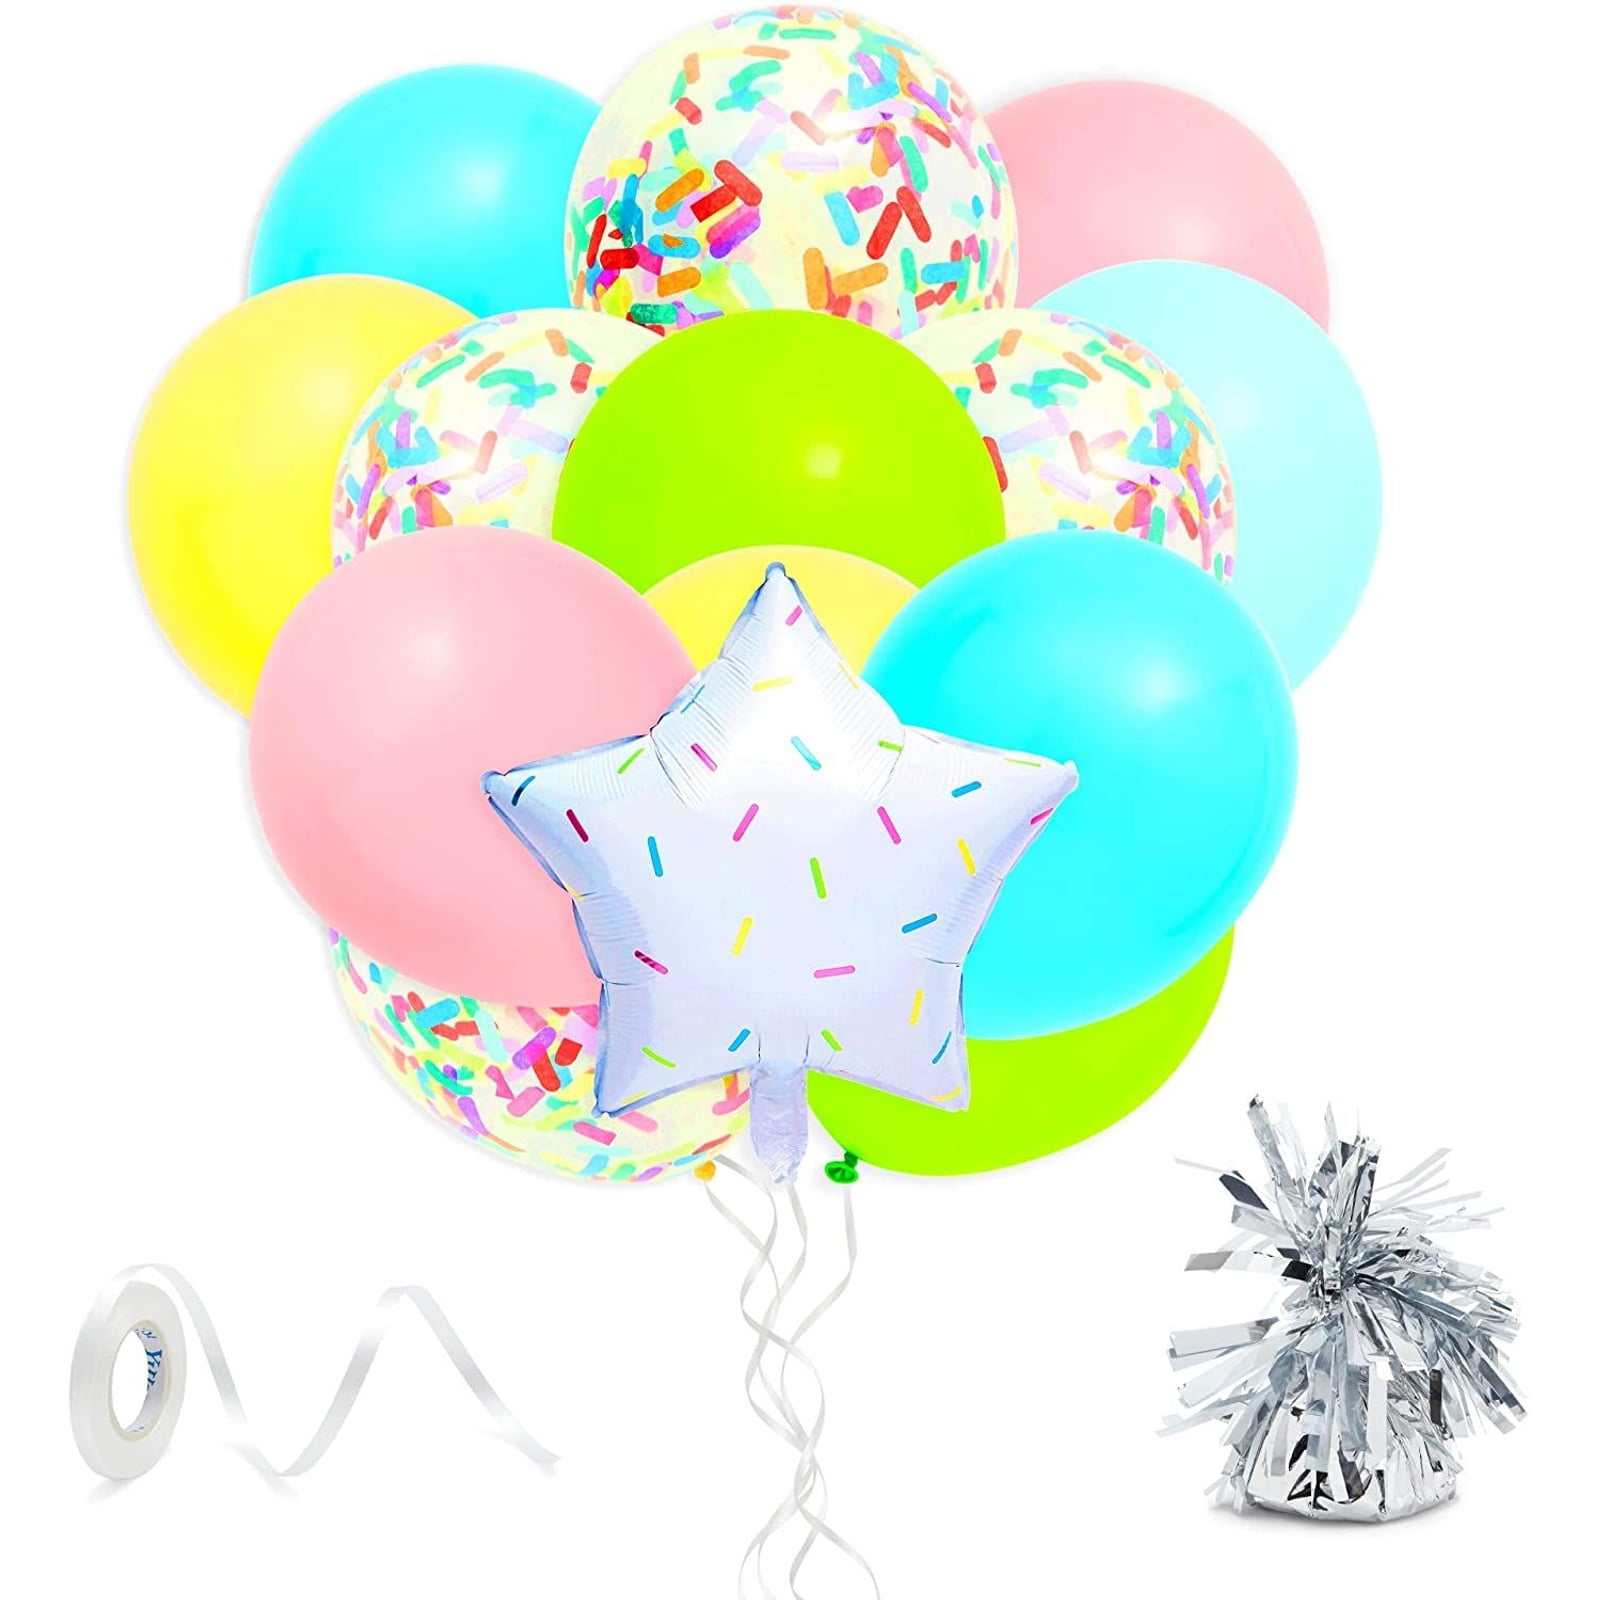 52 Pieces Ice Cream Birthday Decorations Happy Birthday Banner Ice Cream Honeycomb Centerpiece Ice Cream Hanging Swirls Colorful Balloons for Birthday Baby Showr Party Favors Supplies